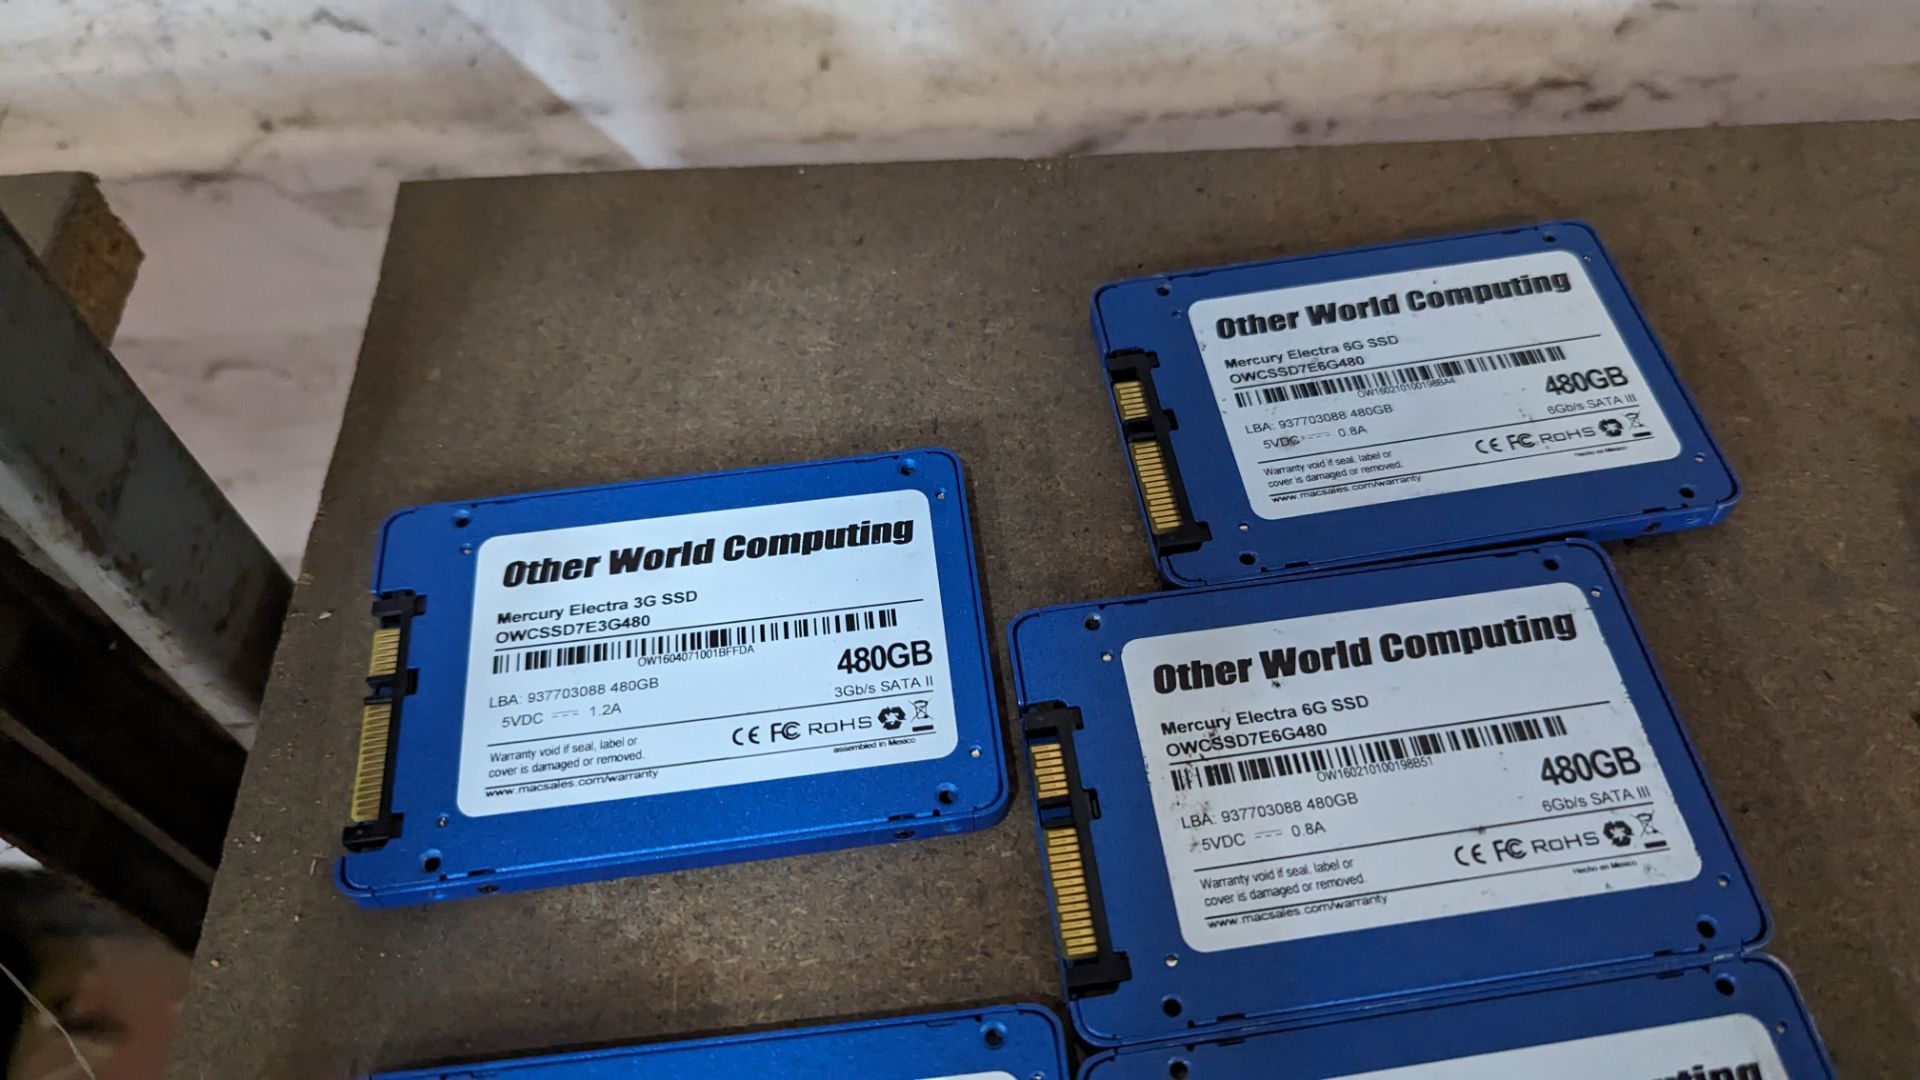 6 off Otherworld Computing Mercury solid state drives comprising 2 off Mercury Electra 3G SSD 480Gb - Image 7 of 7